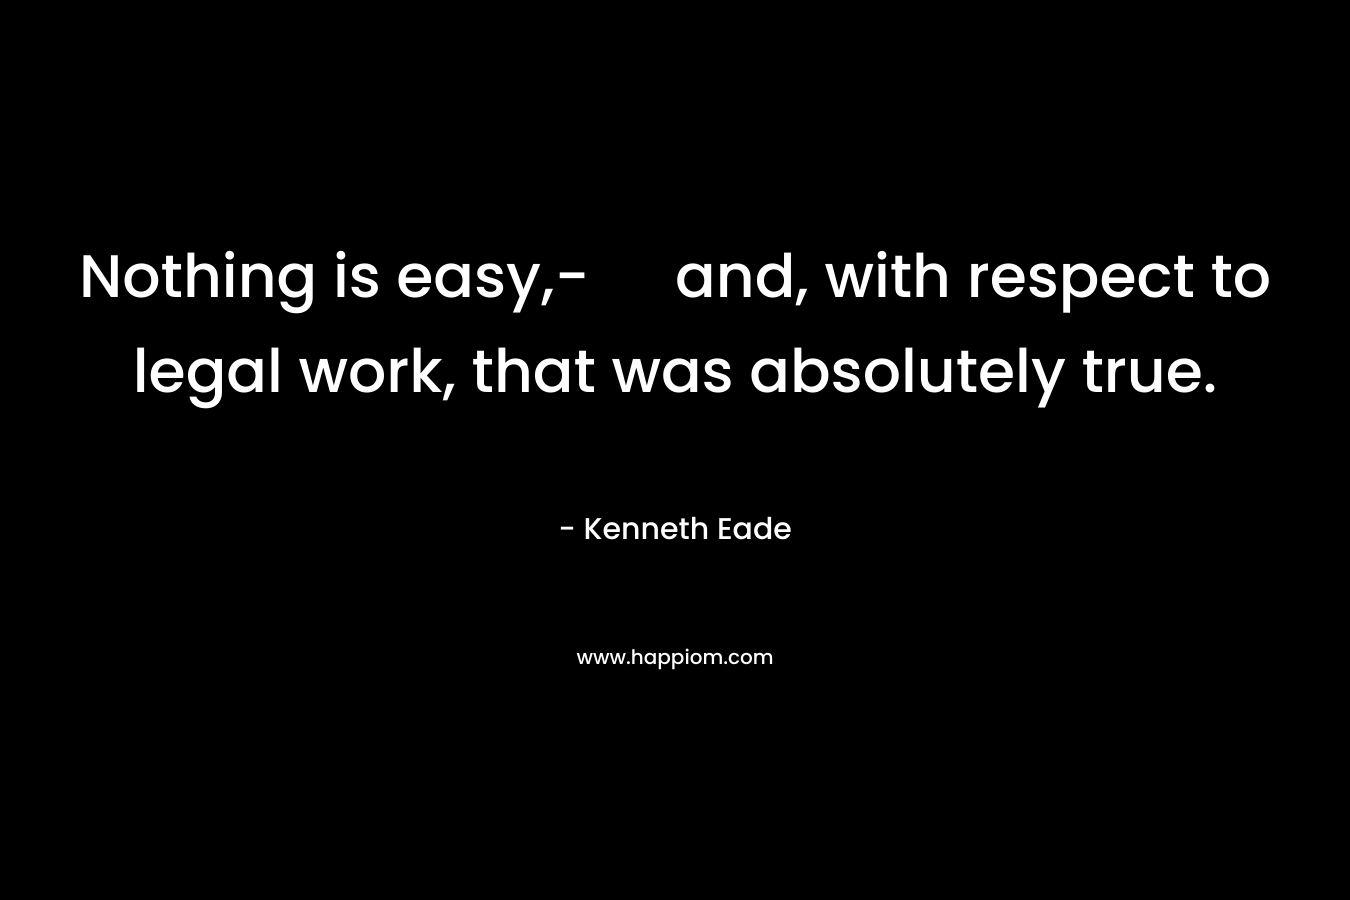 Nothing is easy,- and, with respect to legal work, that was absolutely true.